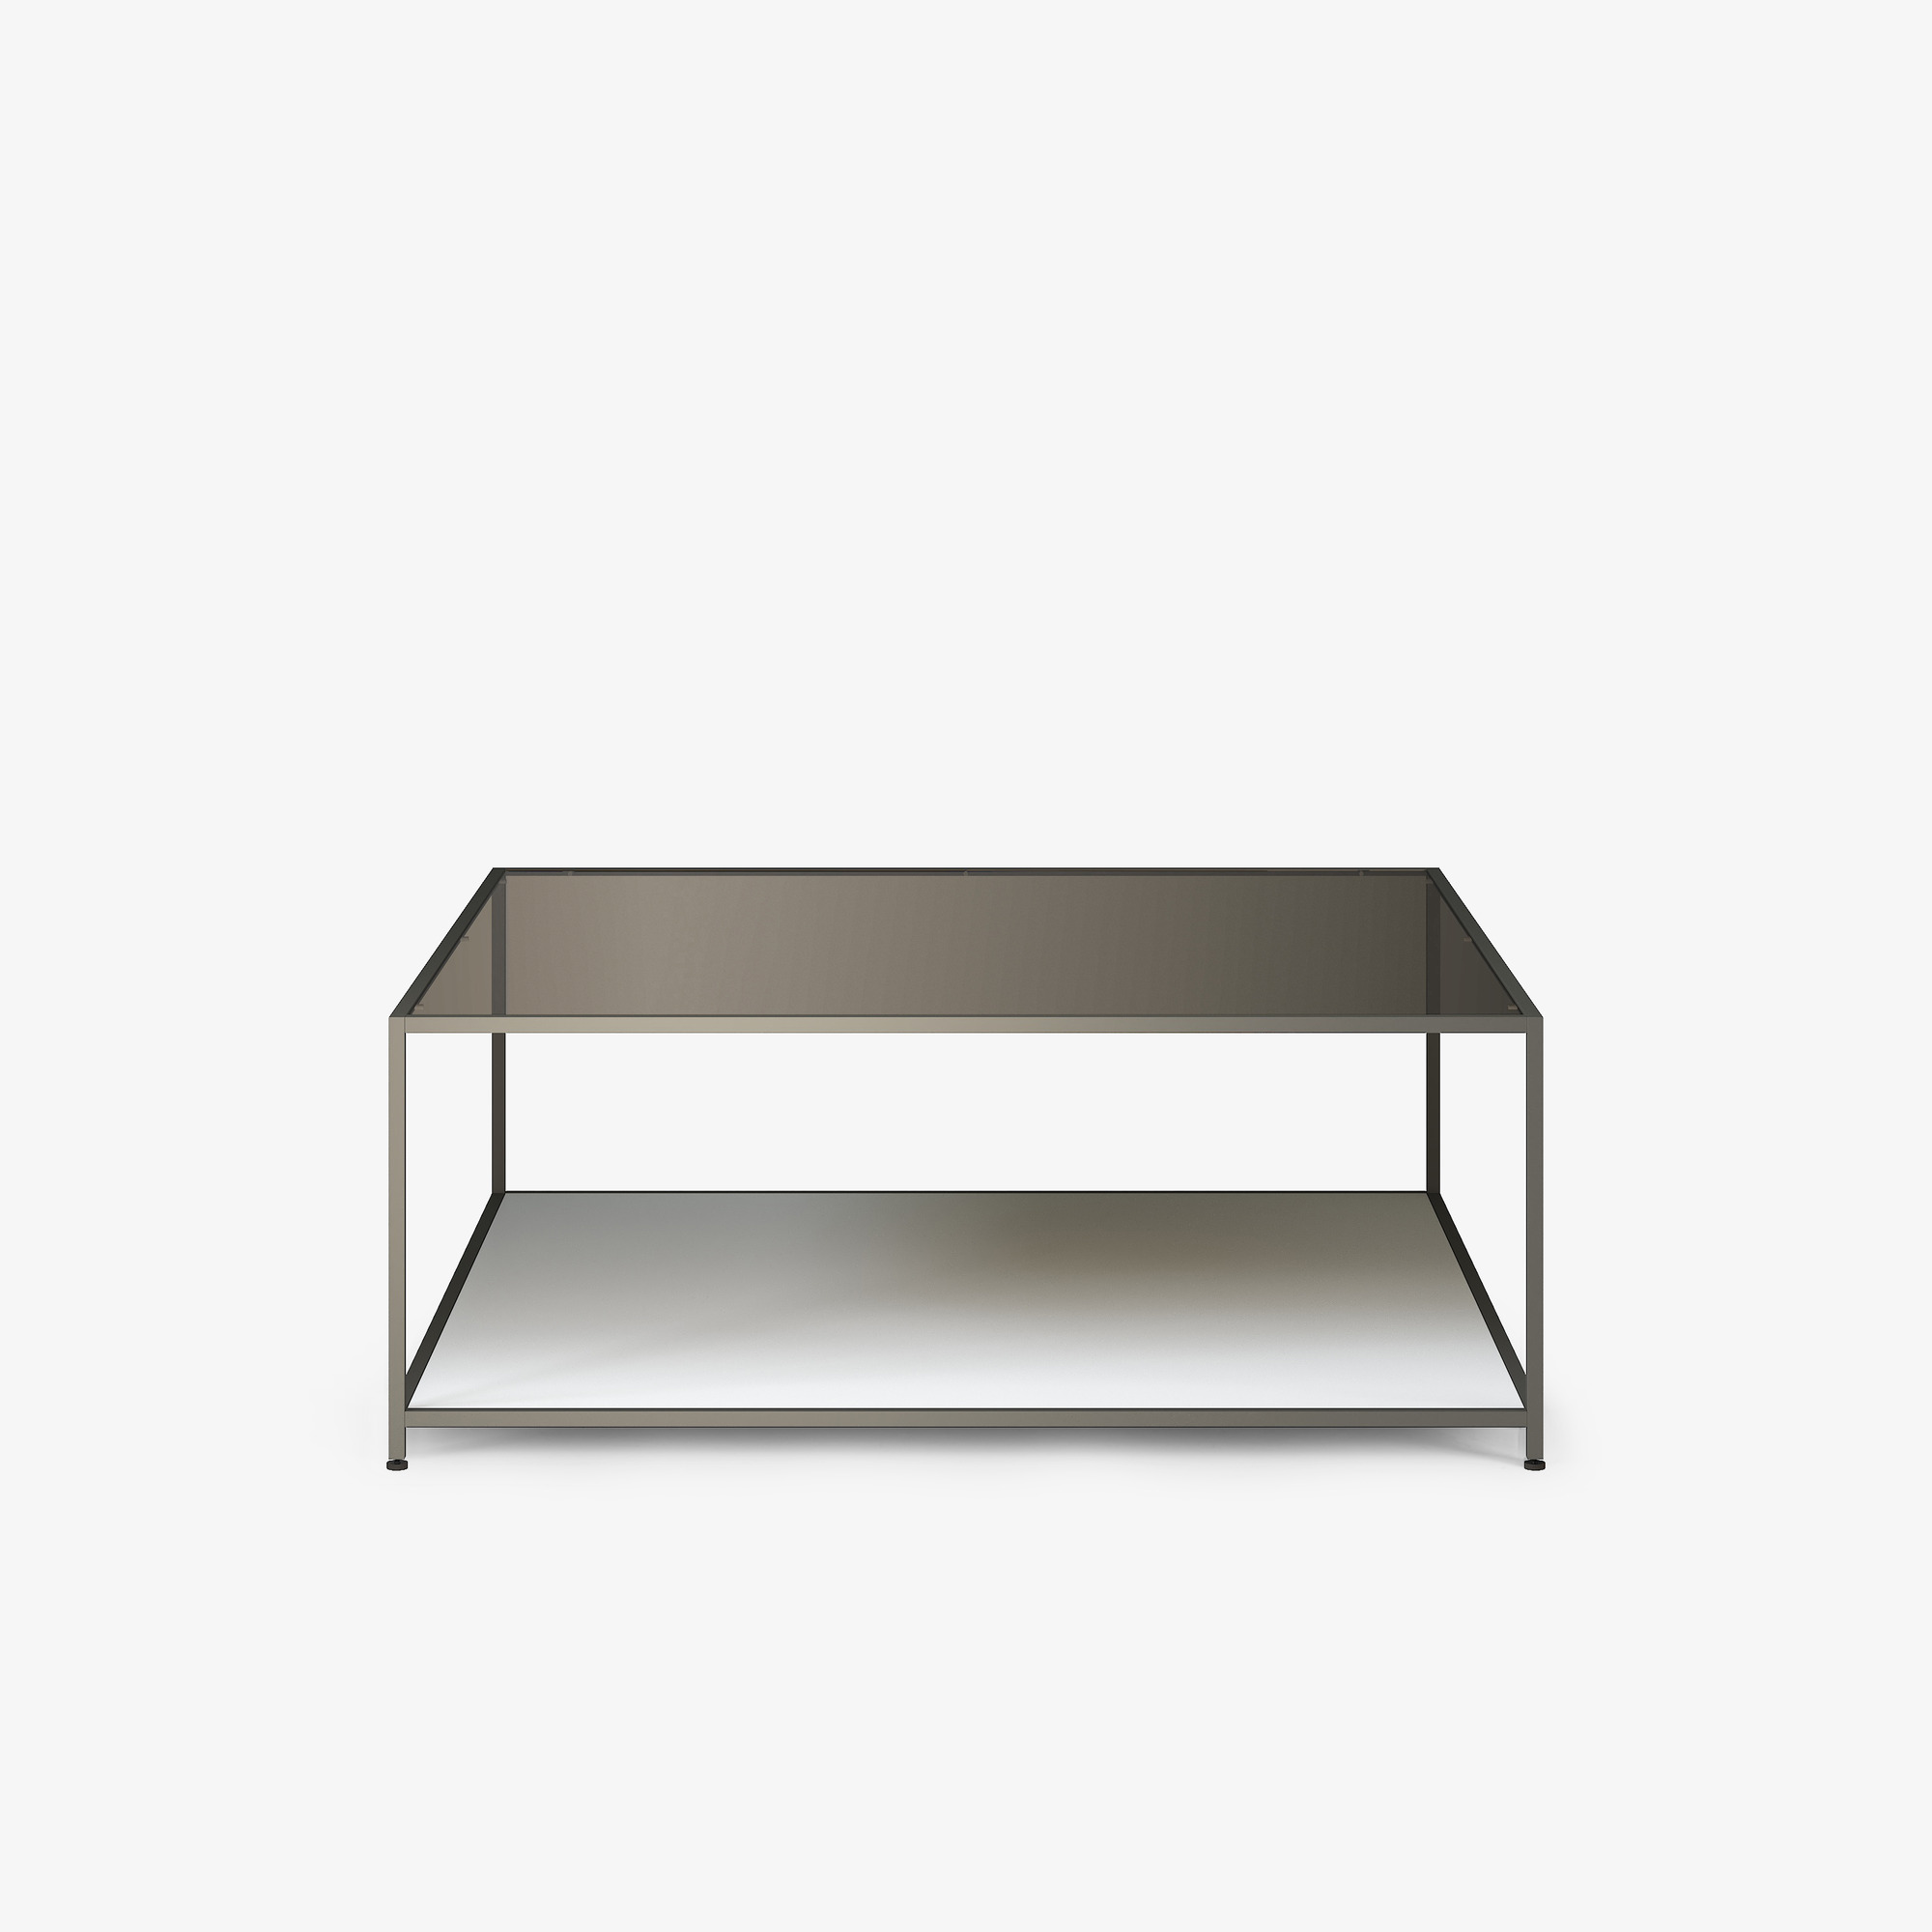 Image Square low table 7